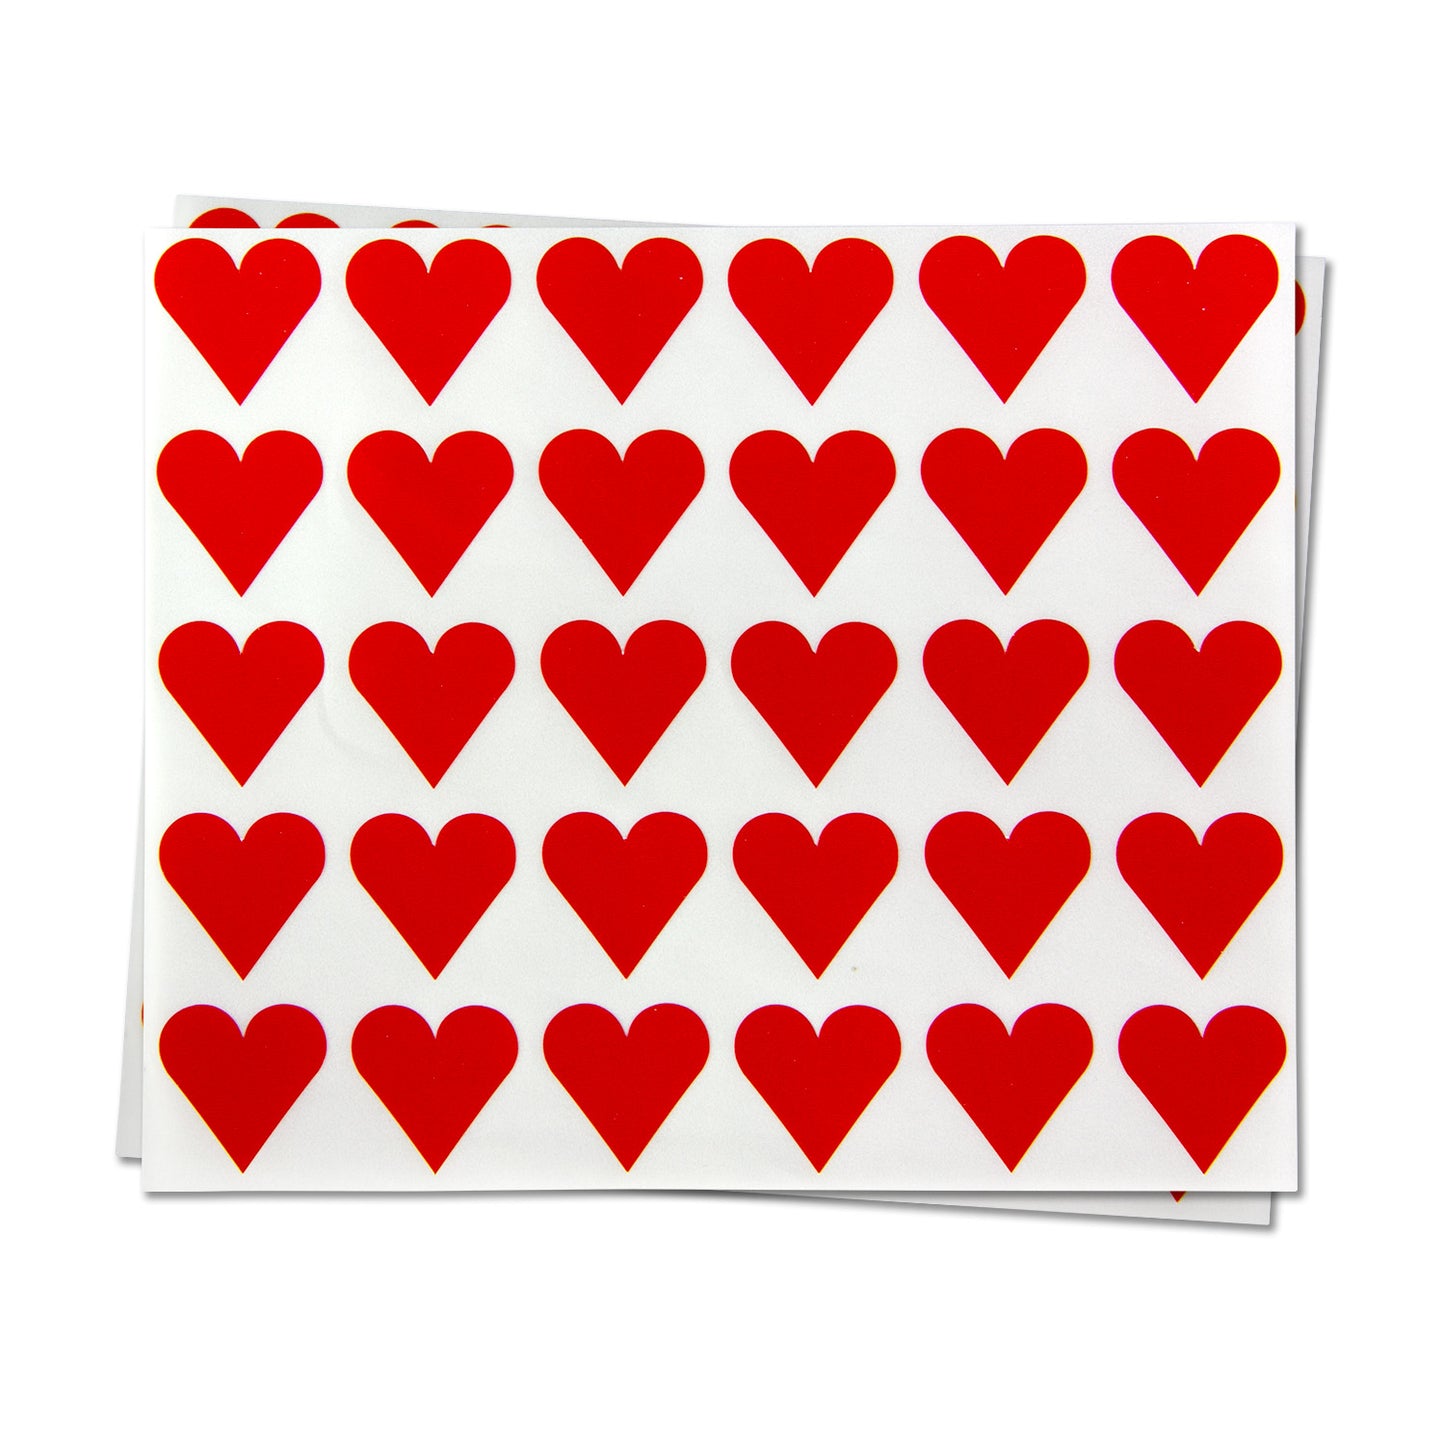 1 x 1 inch | Heart Shaped Stickers